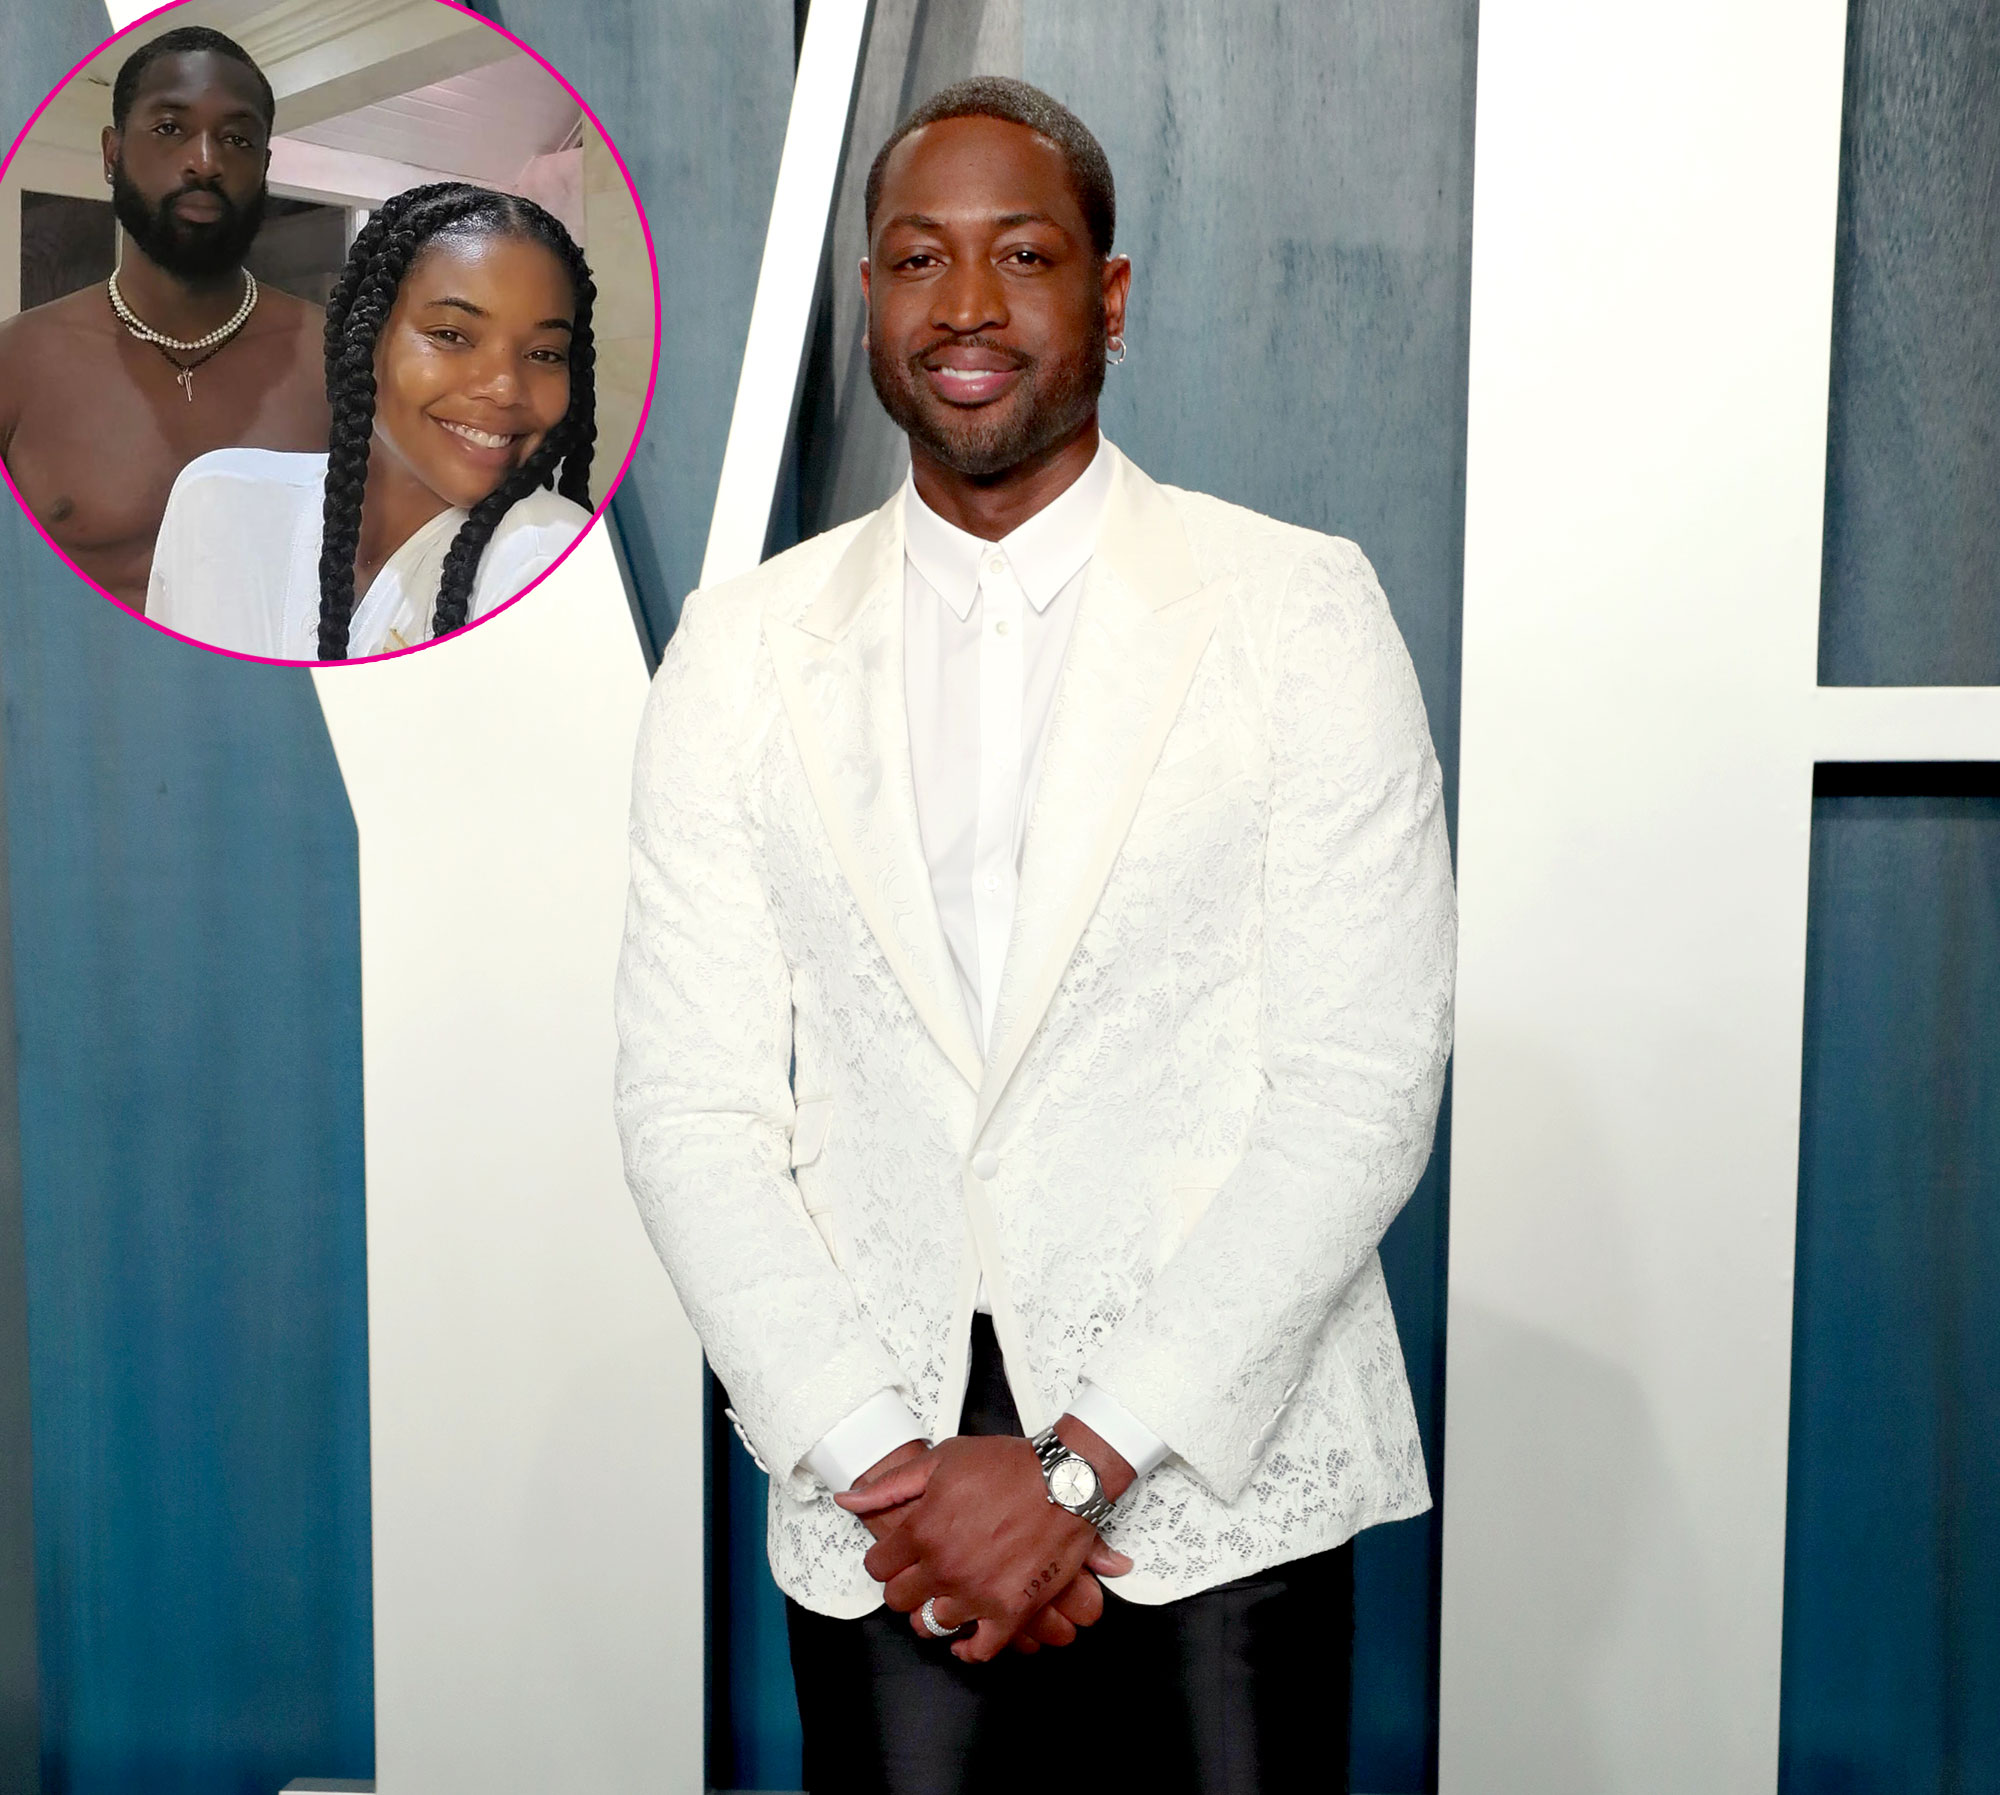 Nude Toddler Porn - Dwyane Wade's Kids React to Nude Insta Post for 39th Birthday